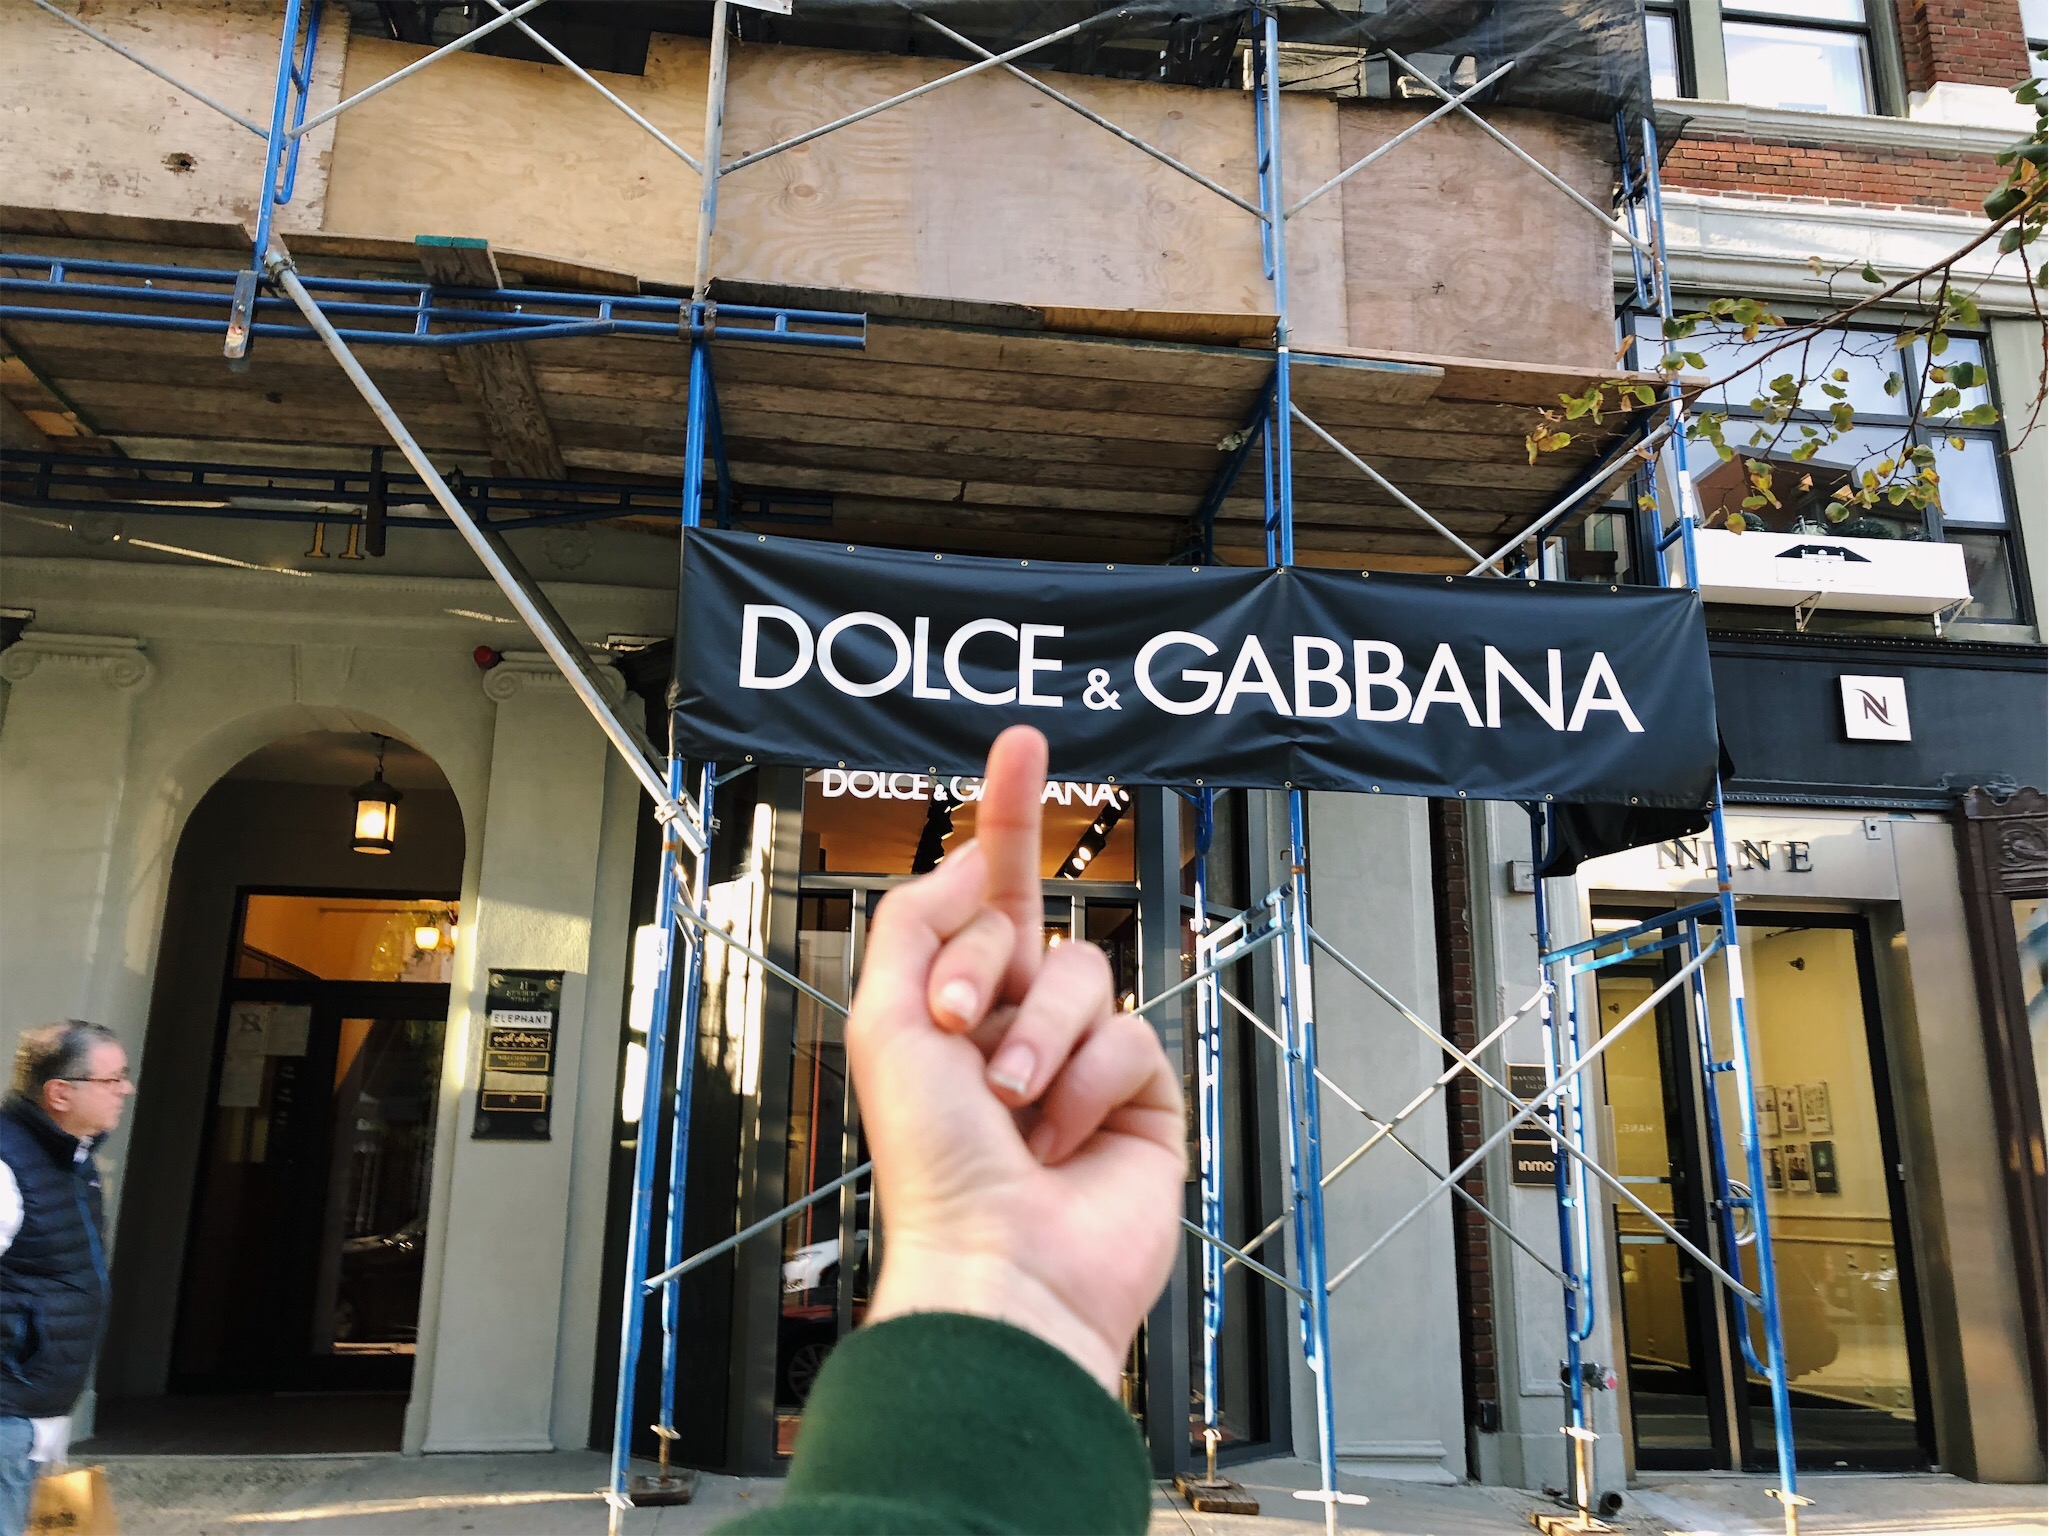 first off dolce and gabbana